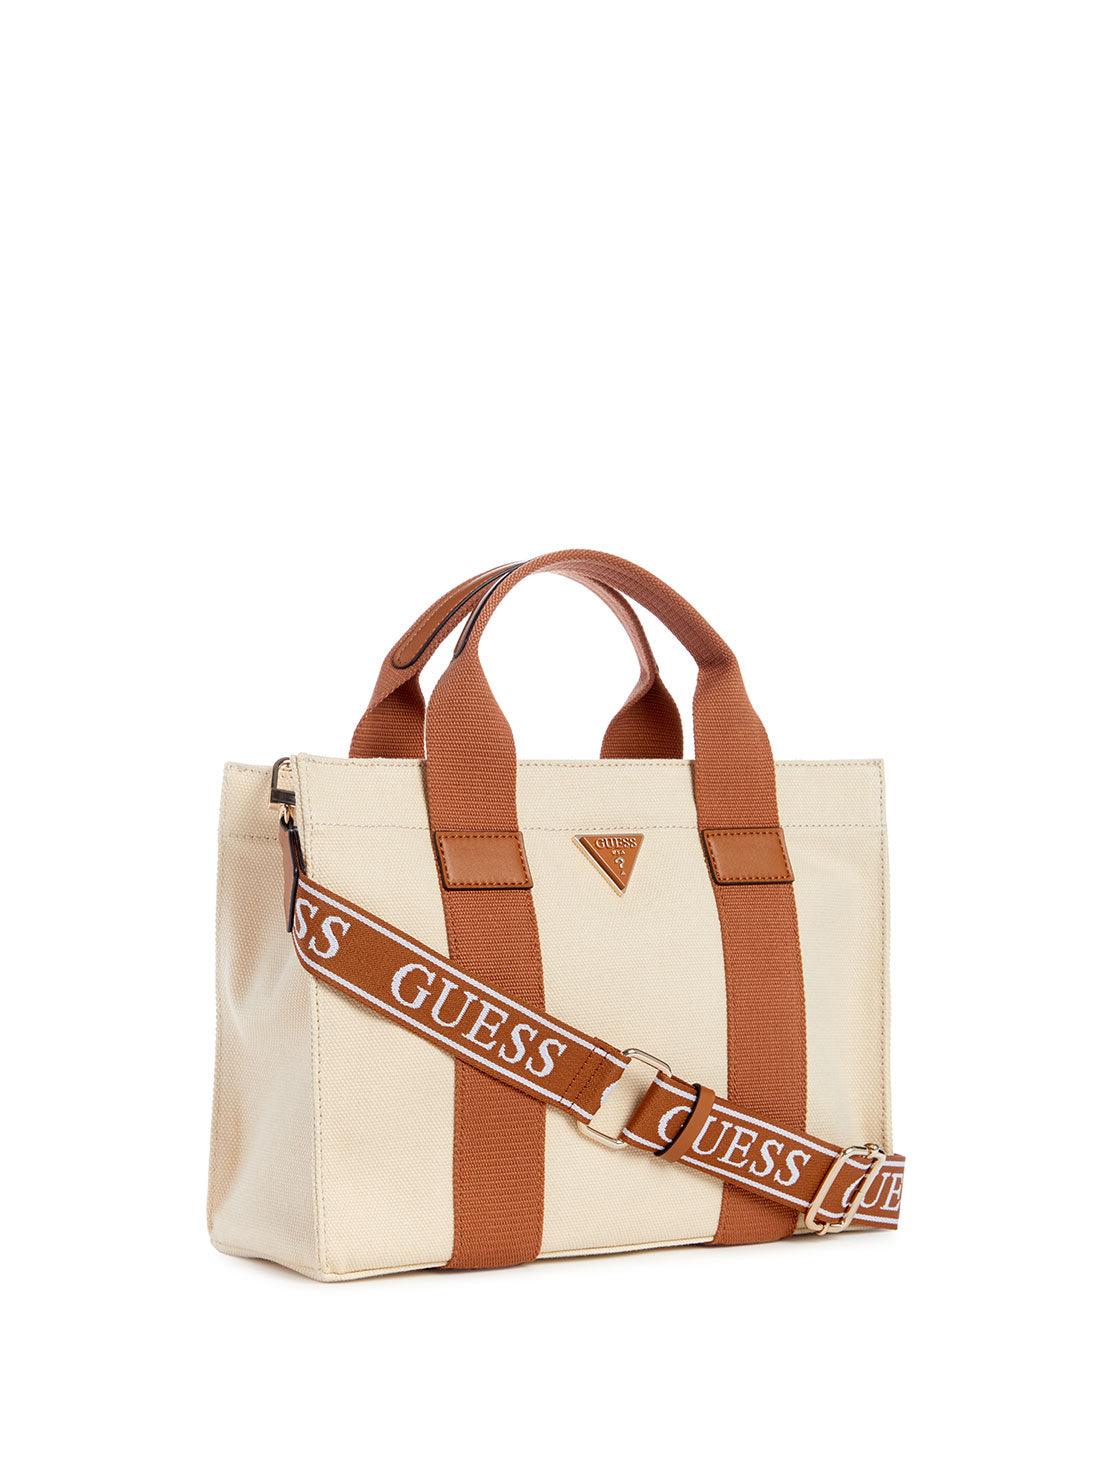 GUESS Beige Brown Canvas Small Tote Bag side view